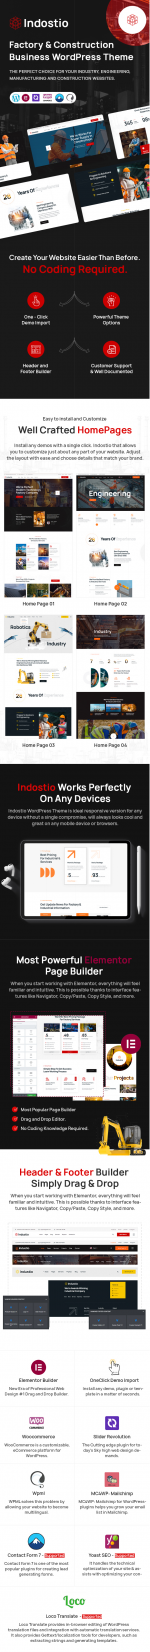 Screenshot 2024-05-17 at 14-45-02 Indostio - Factory and Manufacturing WordPress Theme.png